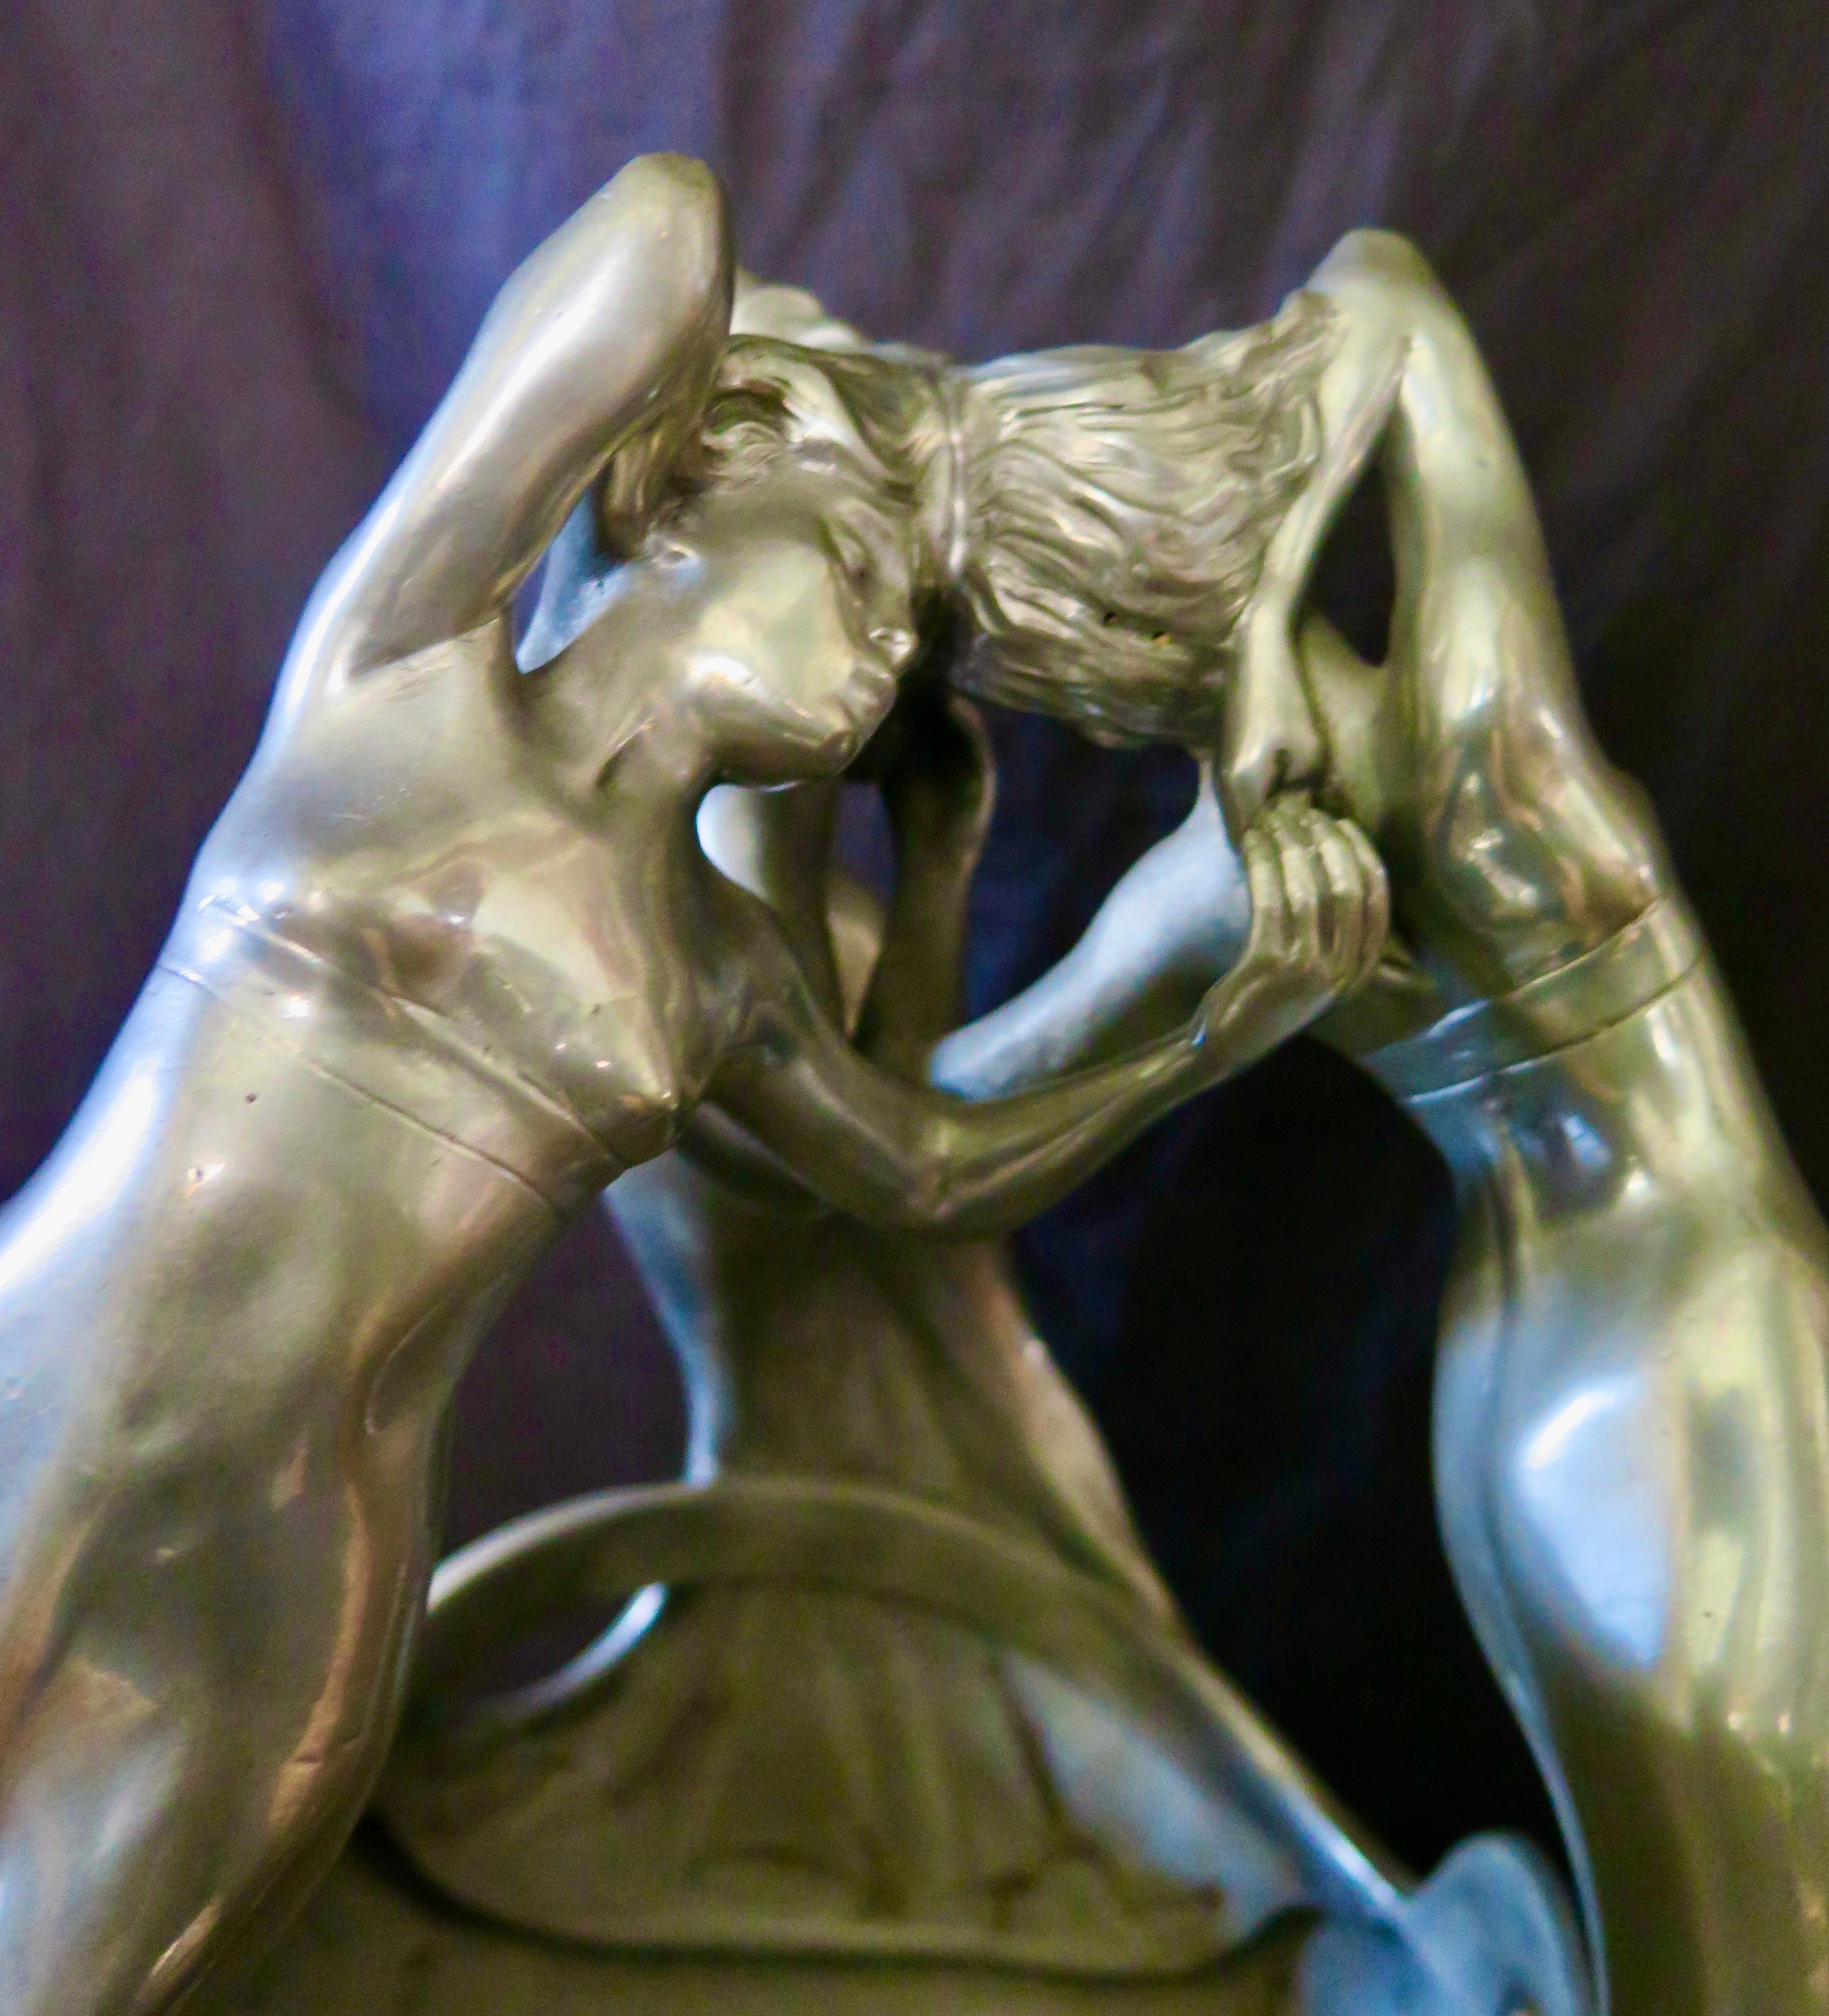 This wonderful French late 19th century Art Nouveau centerpiece features three sensuous maidens/muses dancing in a tight circle. The period pewter center is beautifully sculpted with complete figured maidens hand in hand & touching heads as they